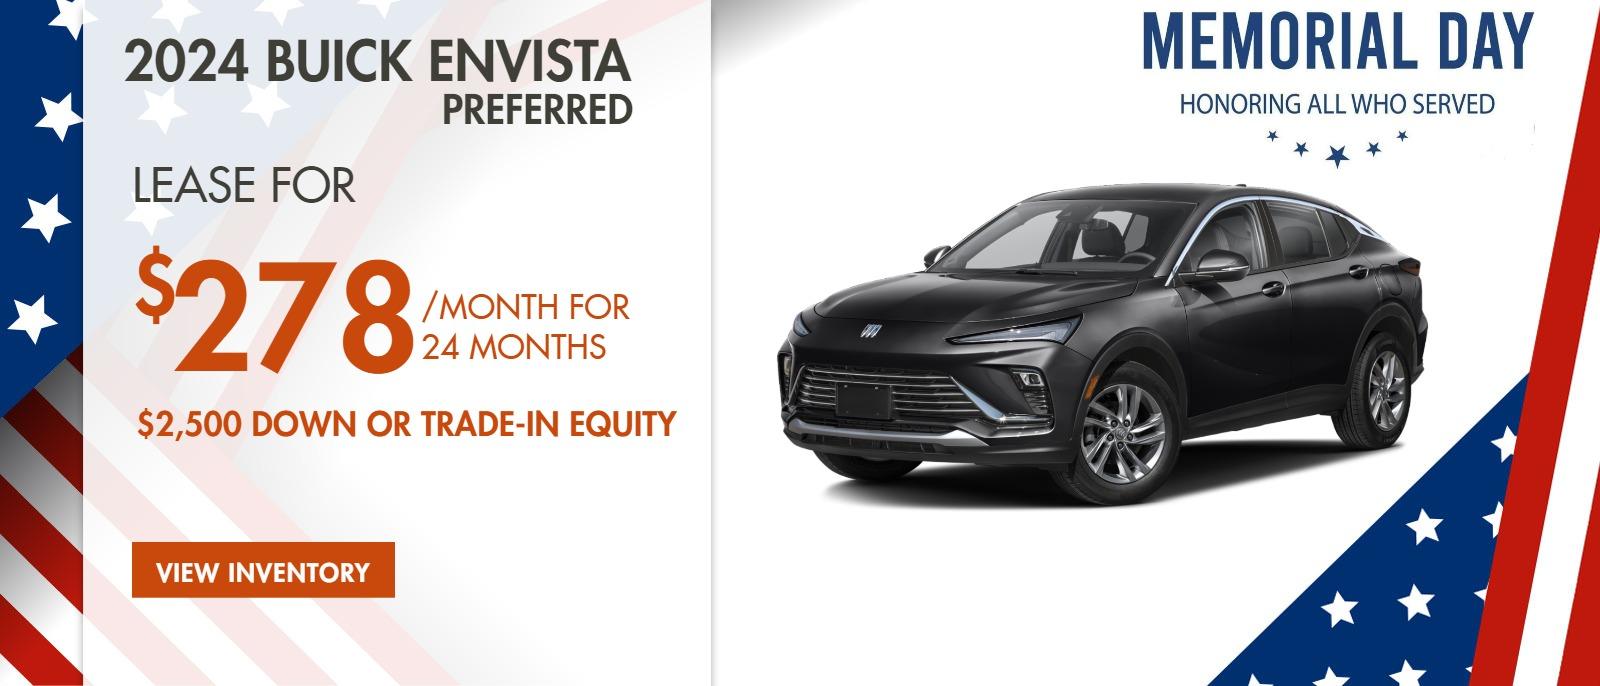 LEASE A 2024 ENVISTA PREFERRED FOR $278 PER MONTH FOR 24 MONTHS FROM MIKE YOUNG BUICK GMC IN FRANKENMUTH, MI